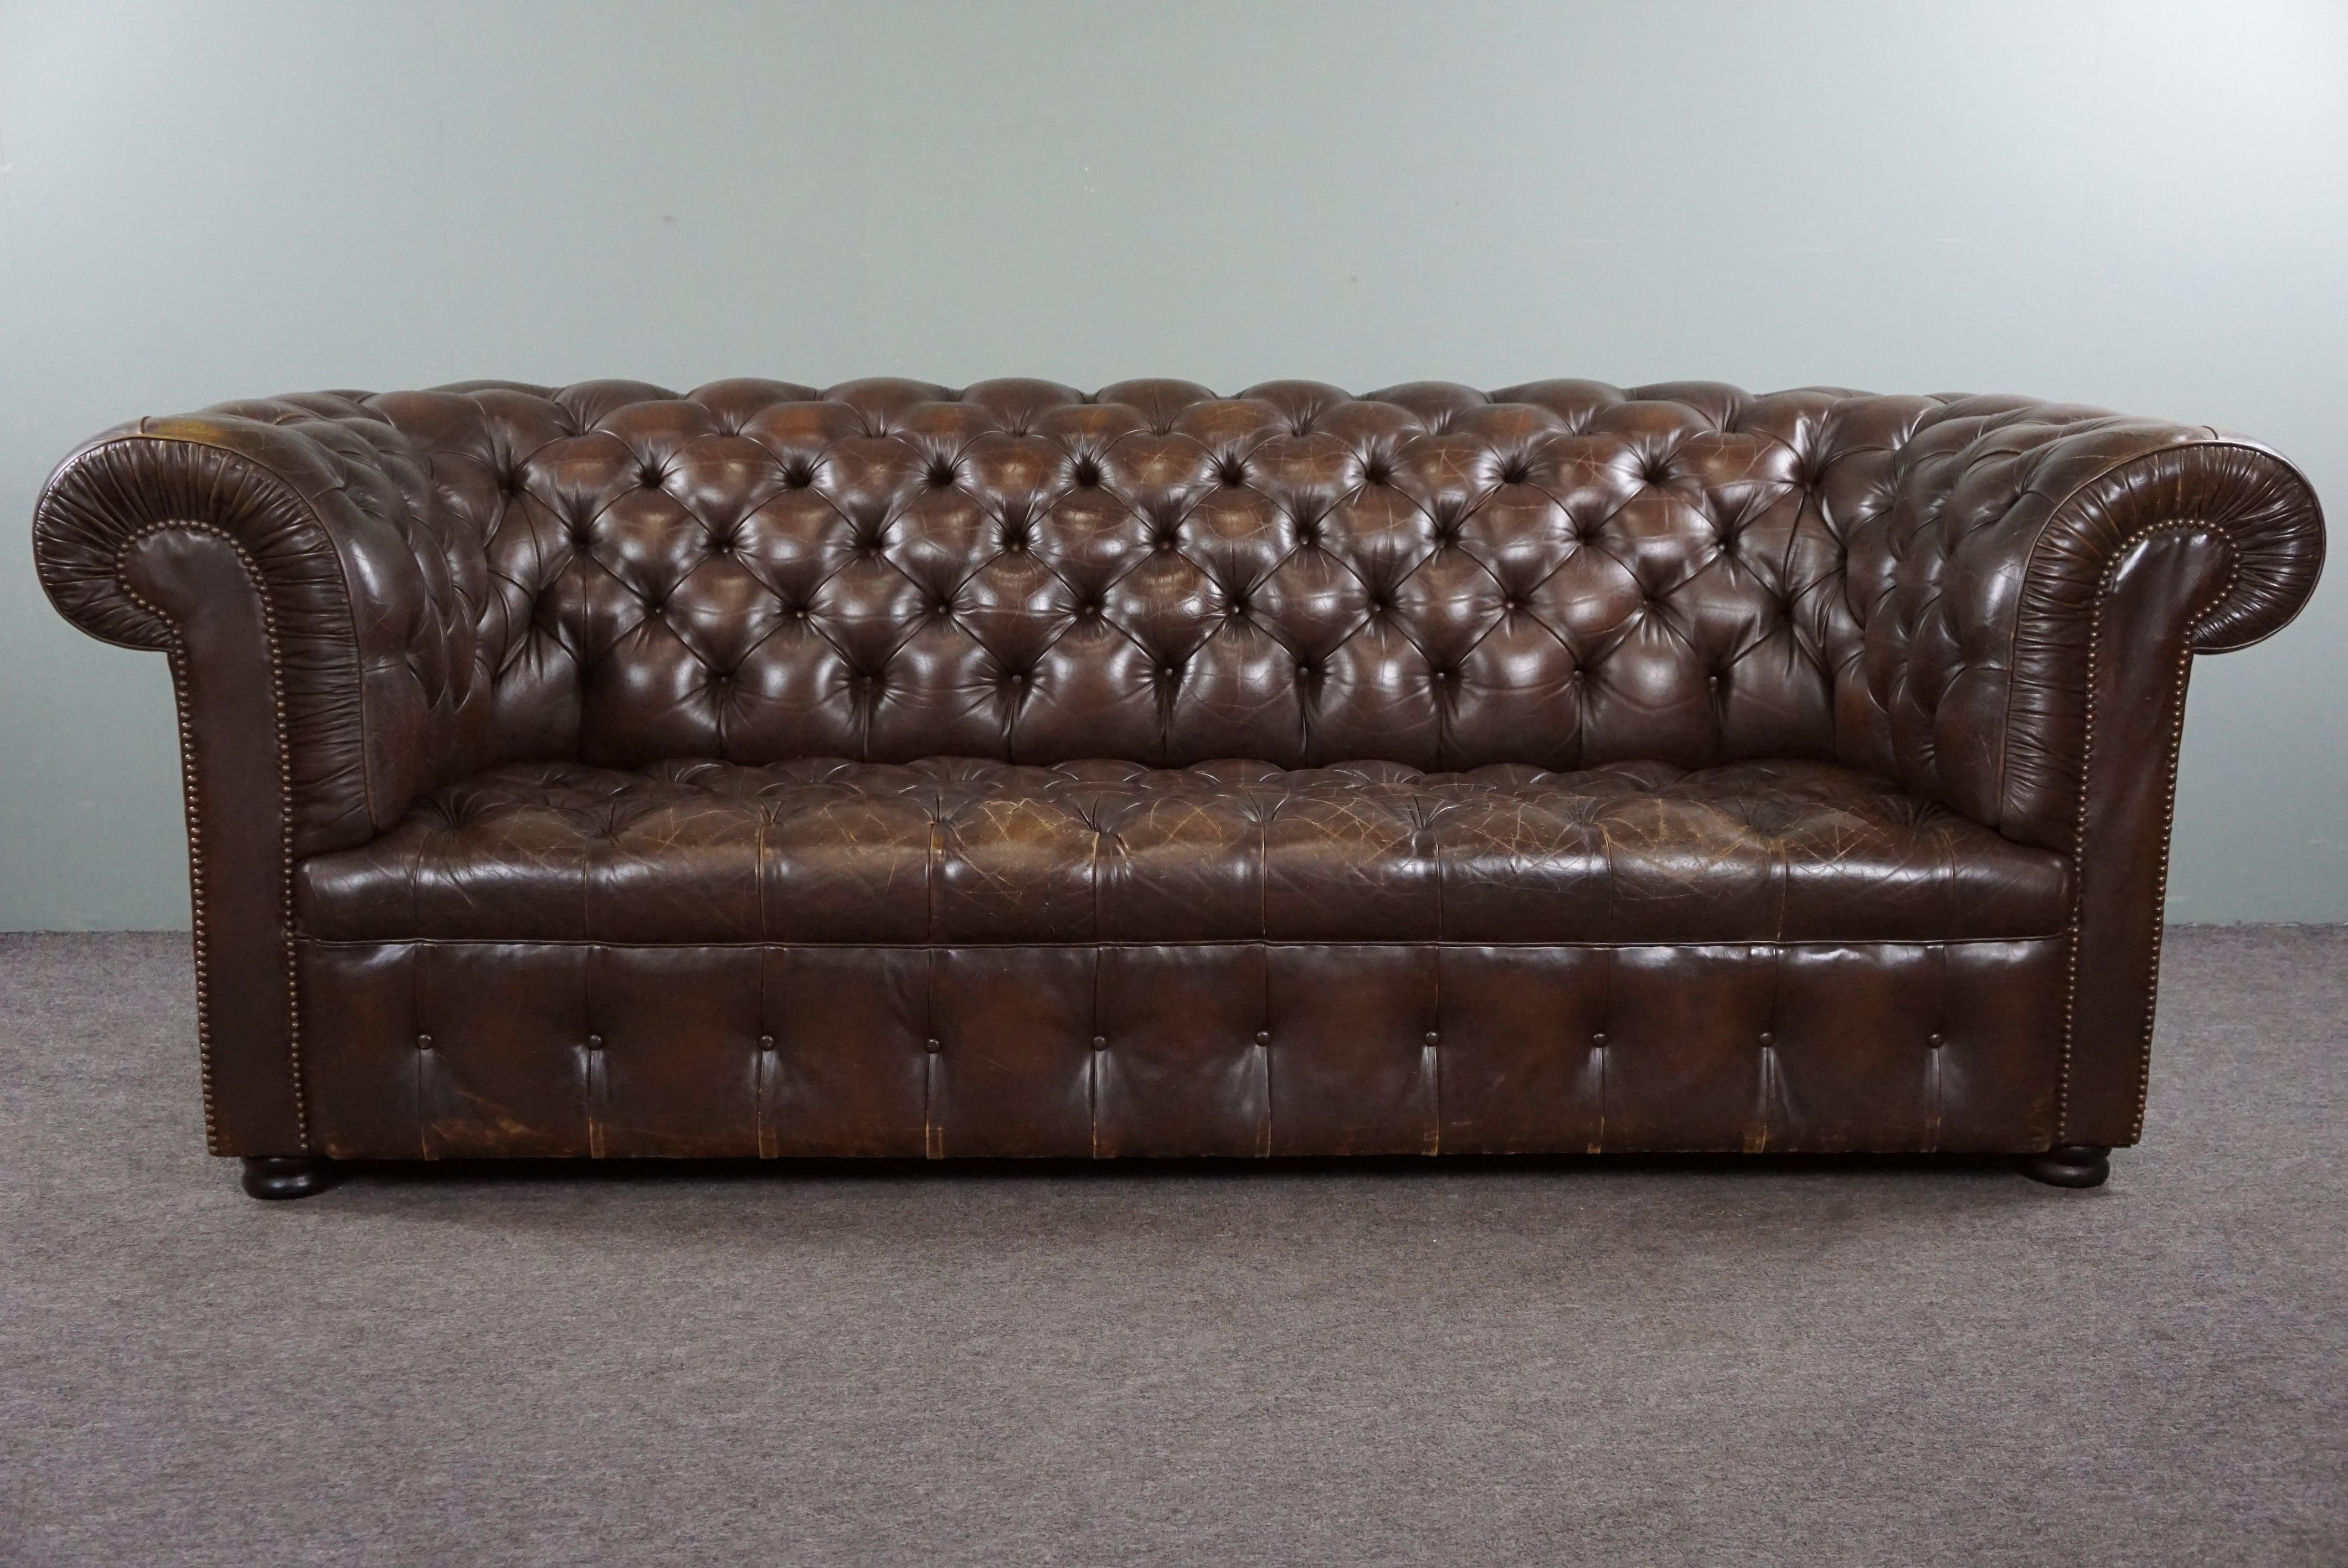 Offered is this wonderfully seated patinated antique cowhide 3-seater Chesterfield sofa with an amazing appearance due to its patina.

This Chesterfield sofa has a beautiful padded seat and a beautiful deep color. Anyone who takes this unique